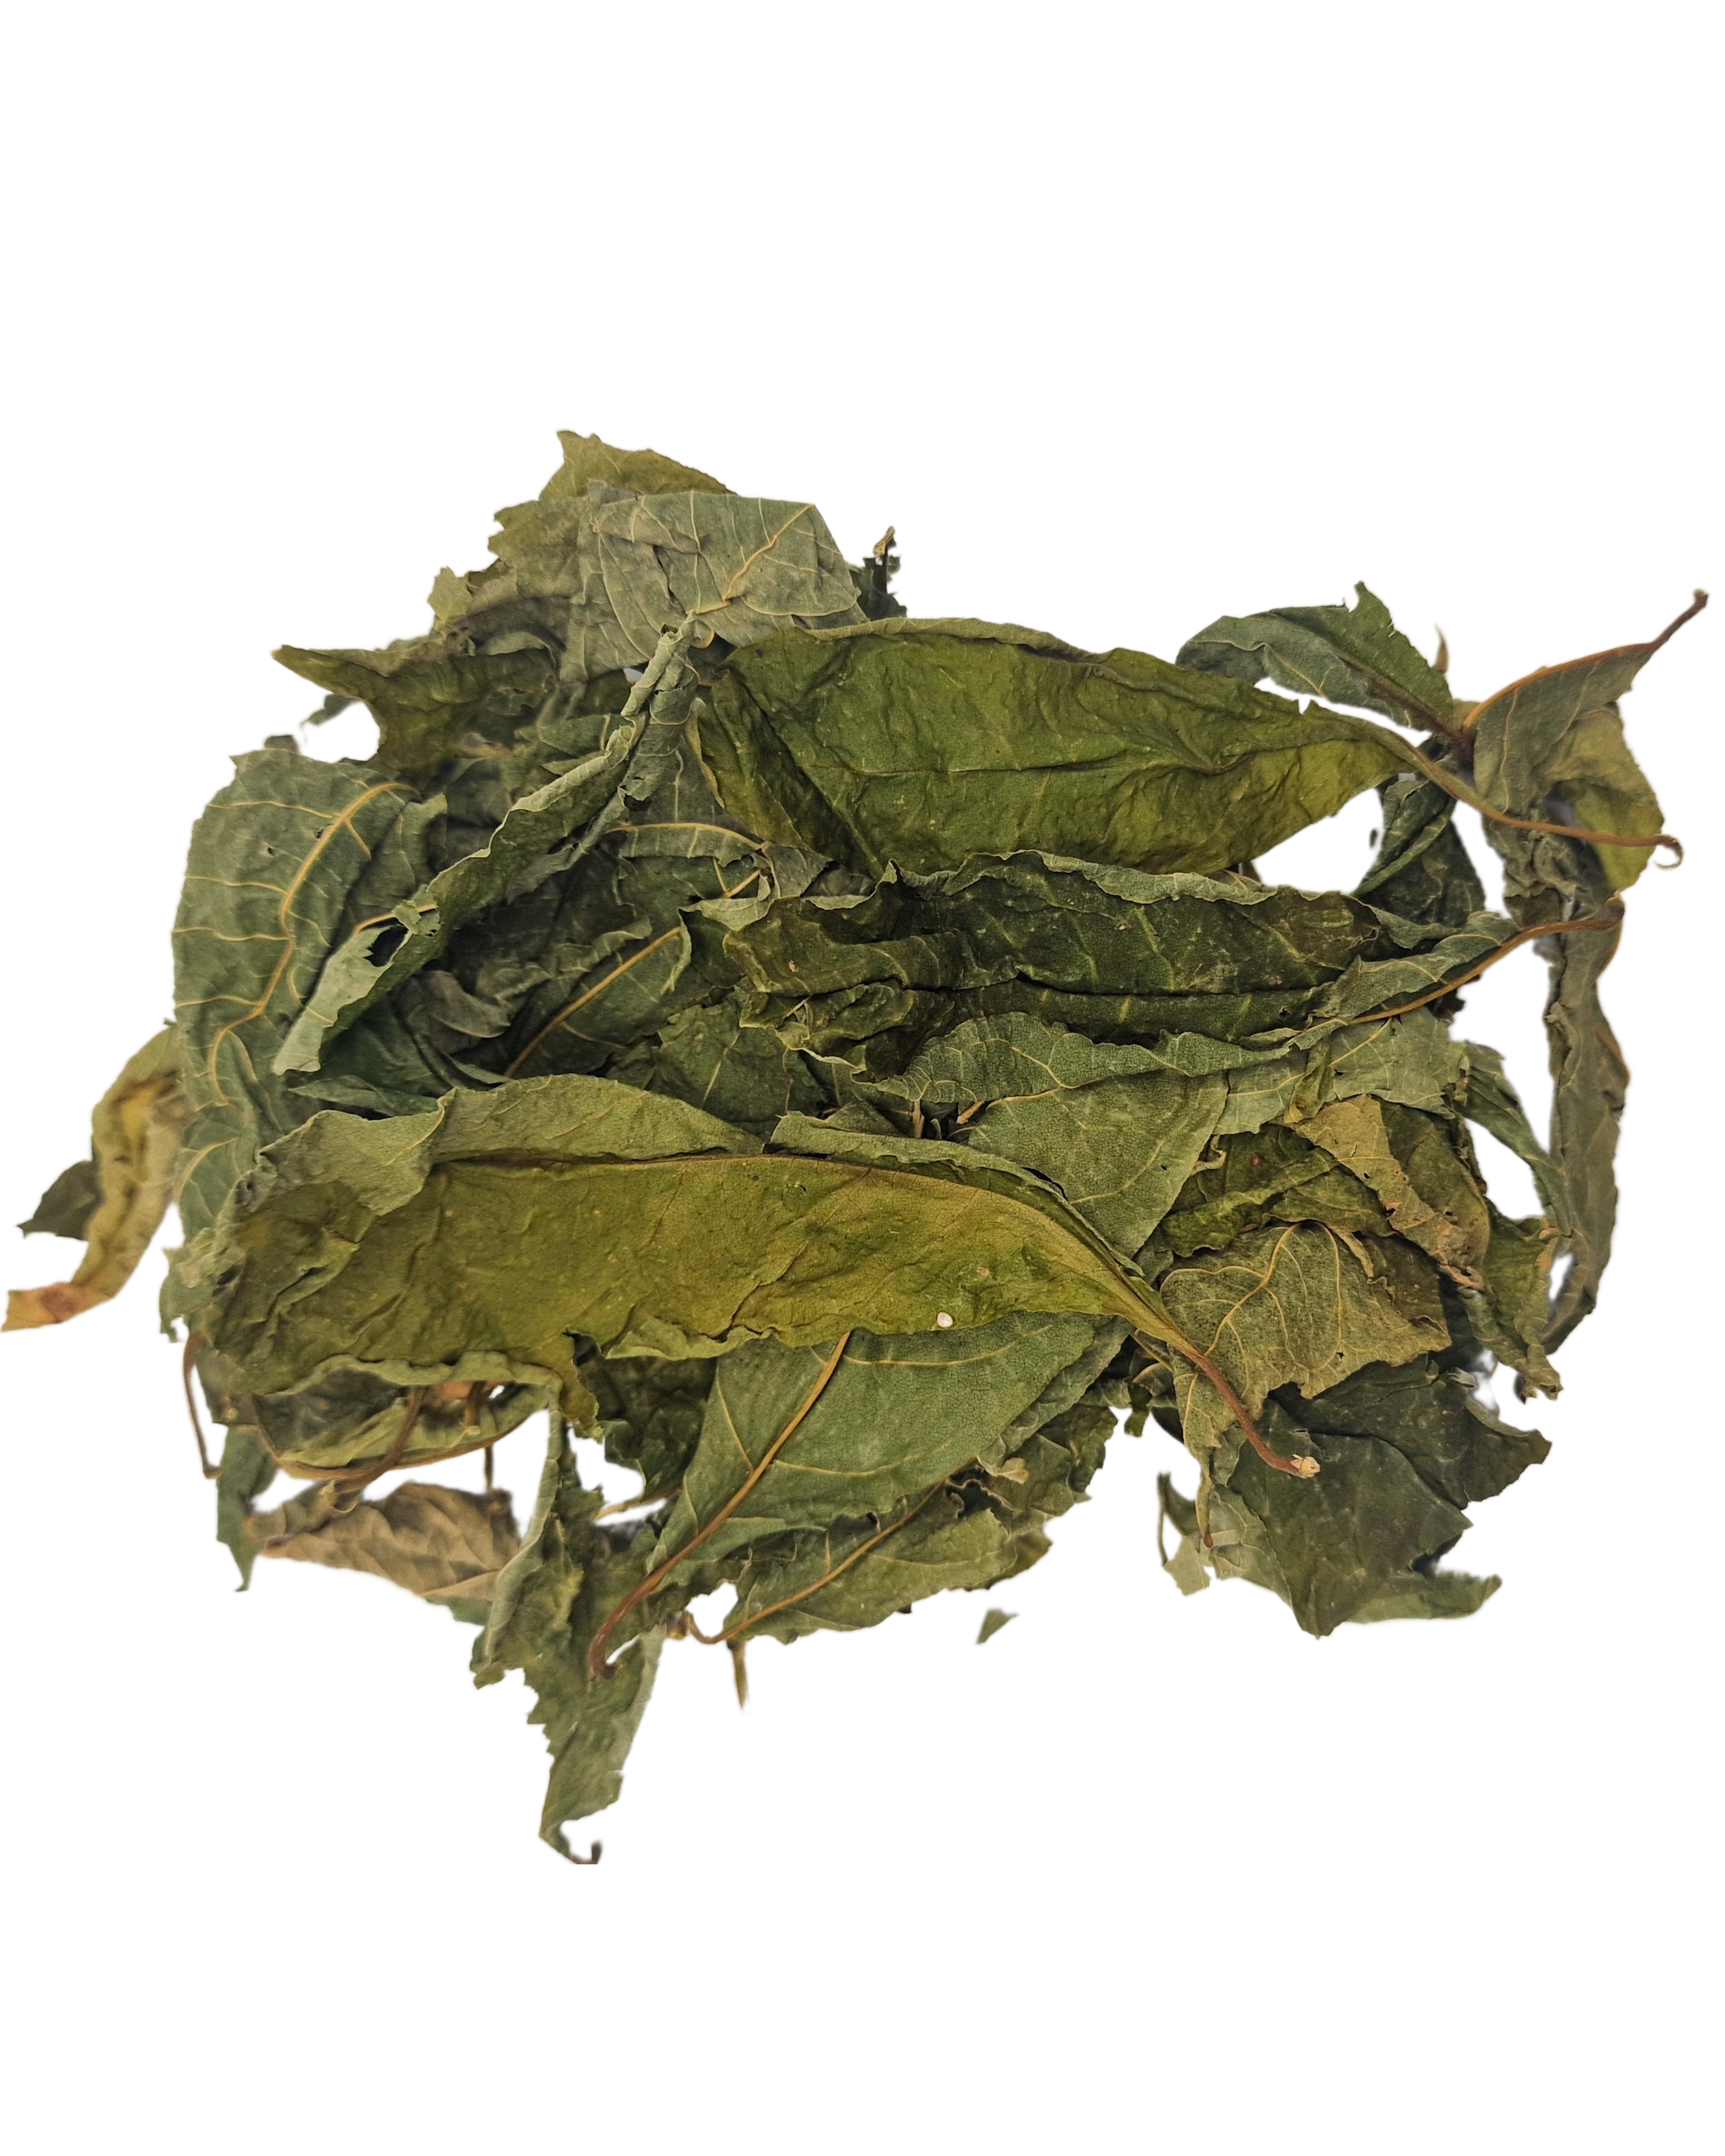 Barbados Guinea Hen Weed - St Lucia Sea Moss